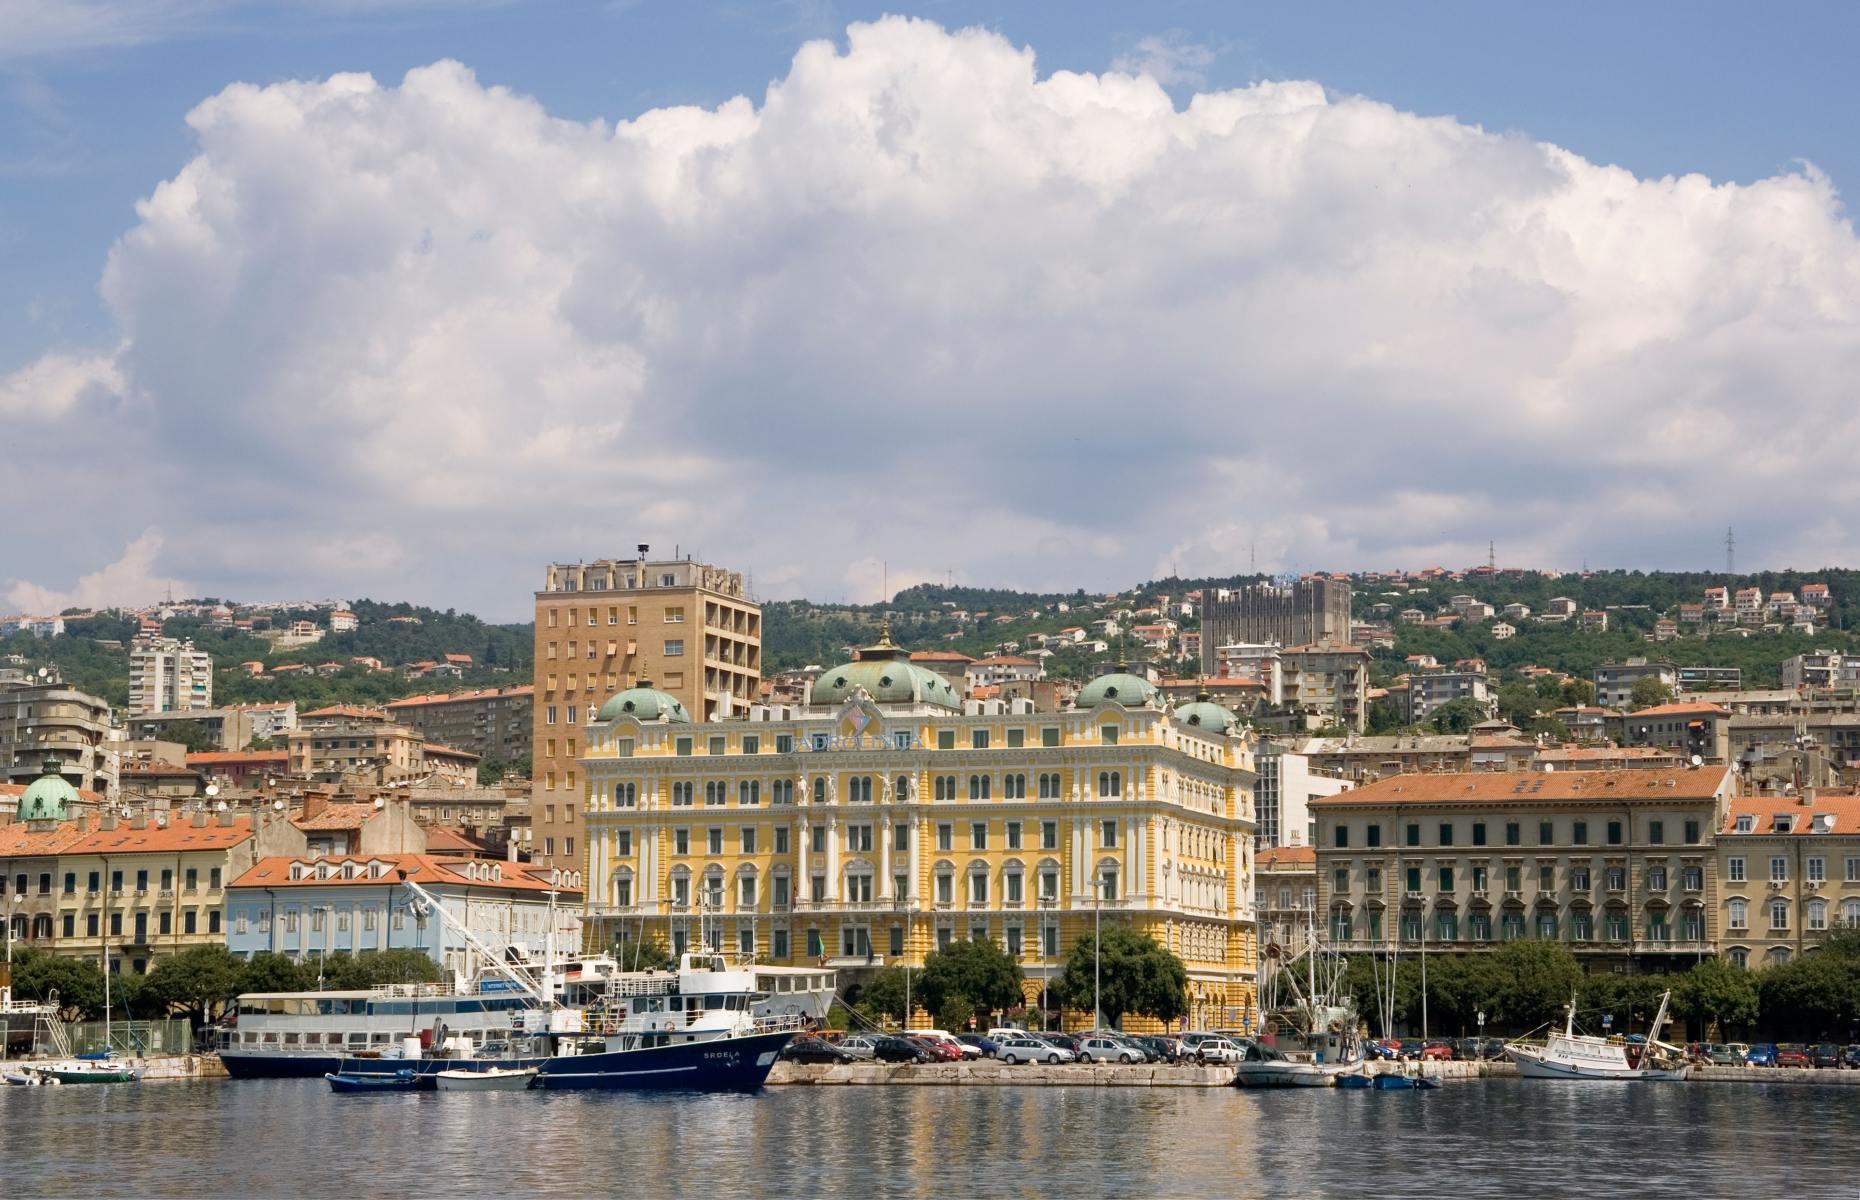 <p>Seasonally, the EuroNight from Stuttgart also runs as far as the Croatian city of Rijeka (pictured), located on Kvarner Bay – an inlet of the Adriatic Sea. The journey takes just under 15 hours and passes through some of the most beautiful landscapes Europe has to offer, from historic German spa towns to sweeping Slovenian countryside, before coming to rest in Rijeka, a former European Capital of Culture. </p>  <p><strong><a href="https://www.loveexploring.com/news/175051/11-top-moneysaving-tips-for-rail-travellers-this-year">Here are our top money-saving tips for rail travellers</a></strong></p>